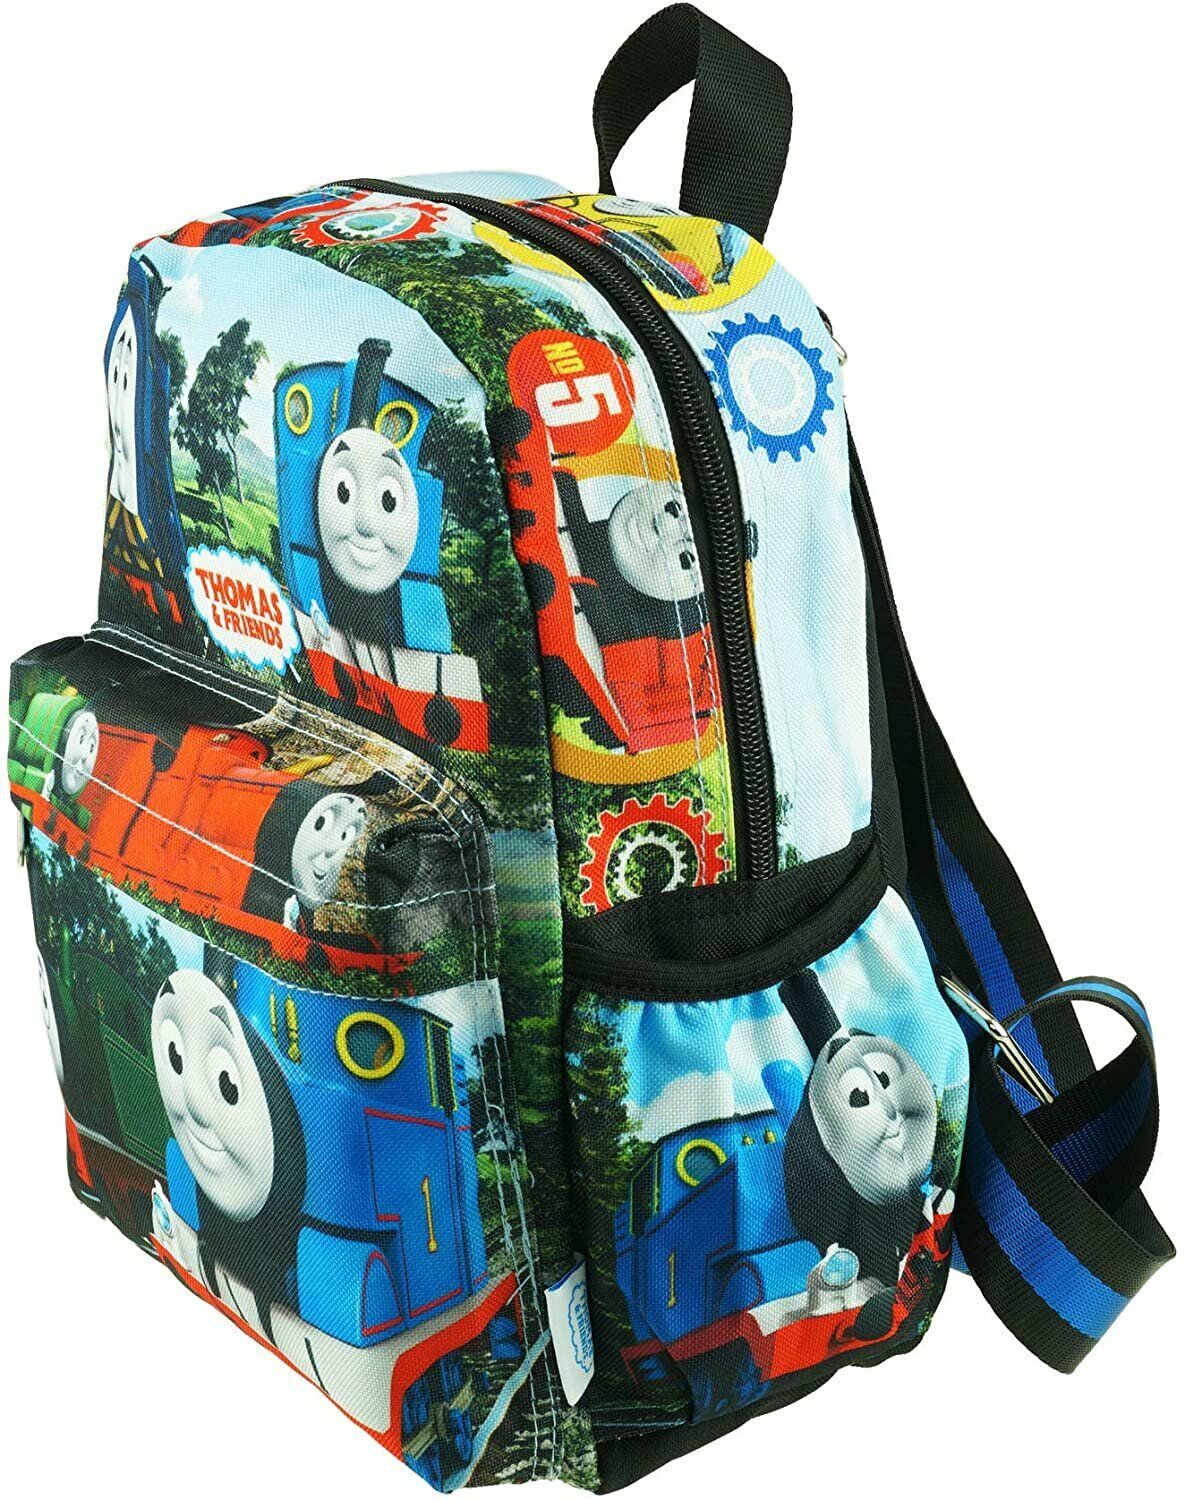 Thomas & Friends Deluxe Oversize Print 12-inch Backpack - A20274